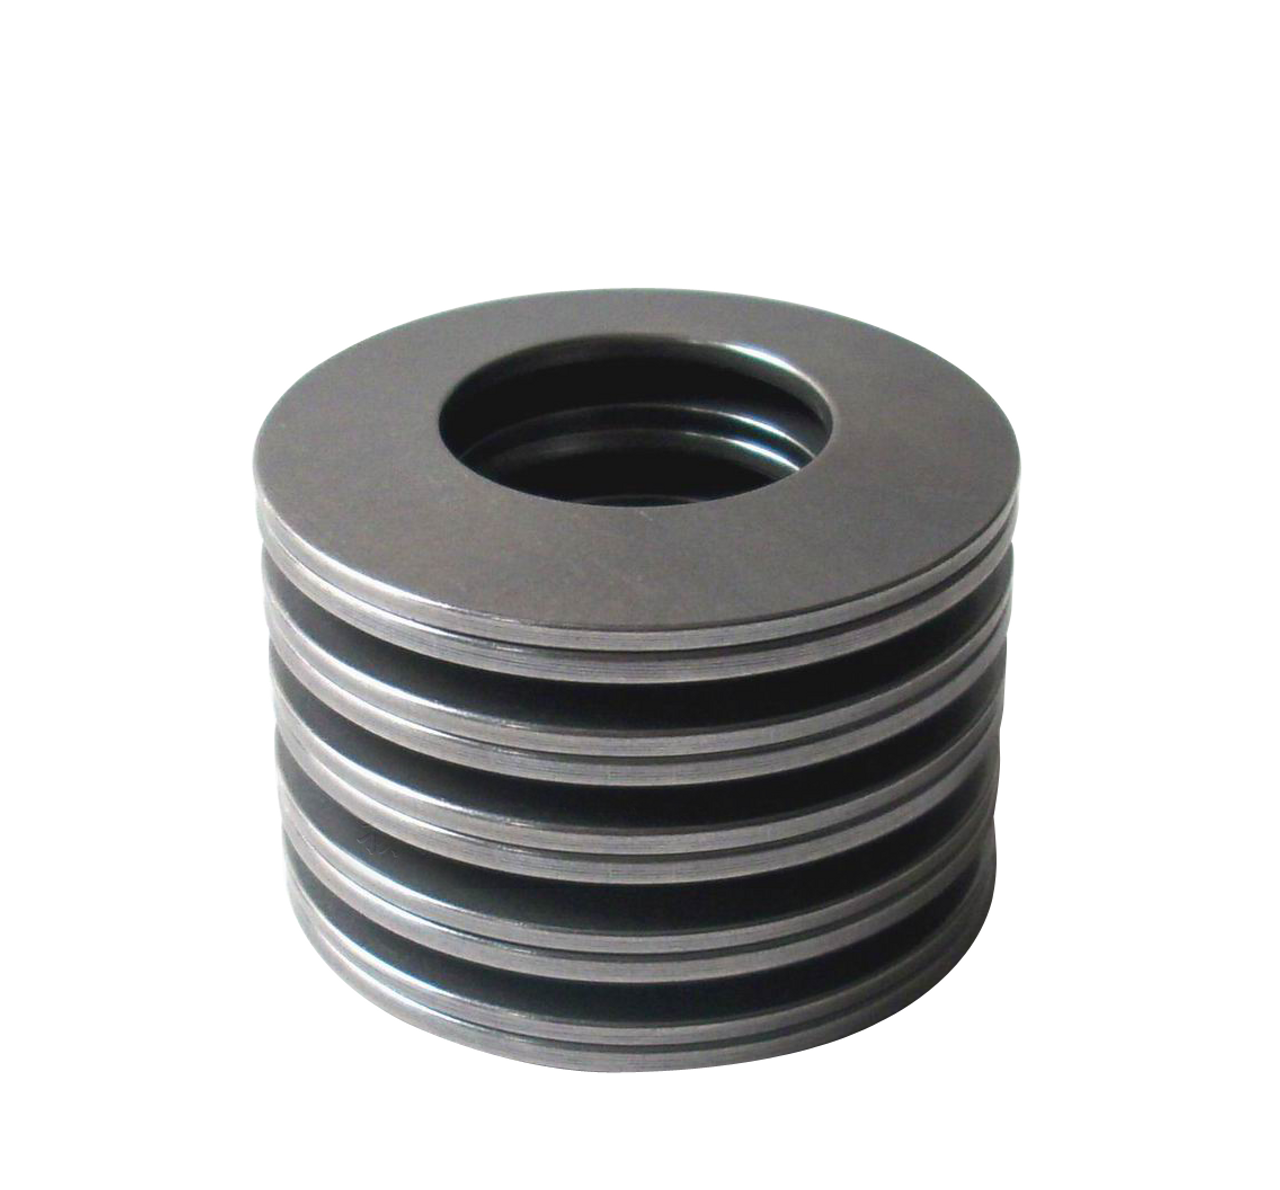 8mm Disc Spring (DIN 2093) Conical Washer  DS008.2-023-08